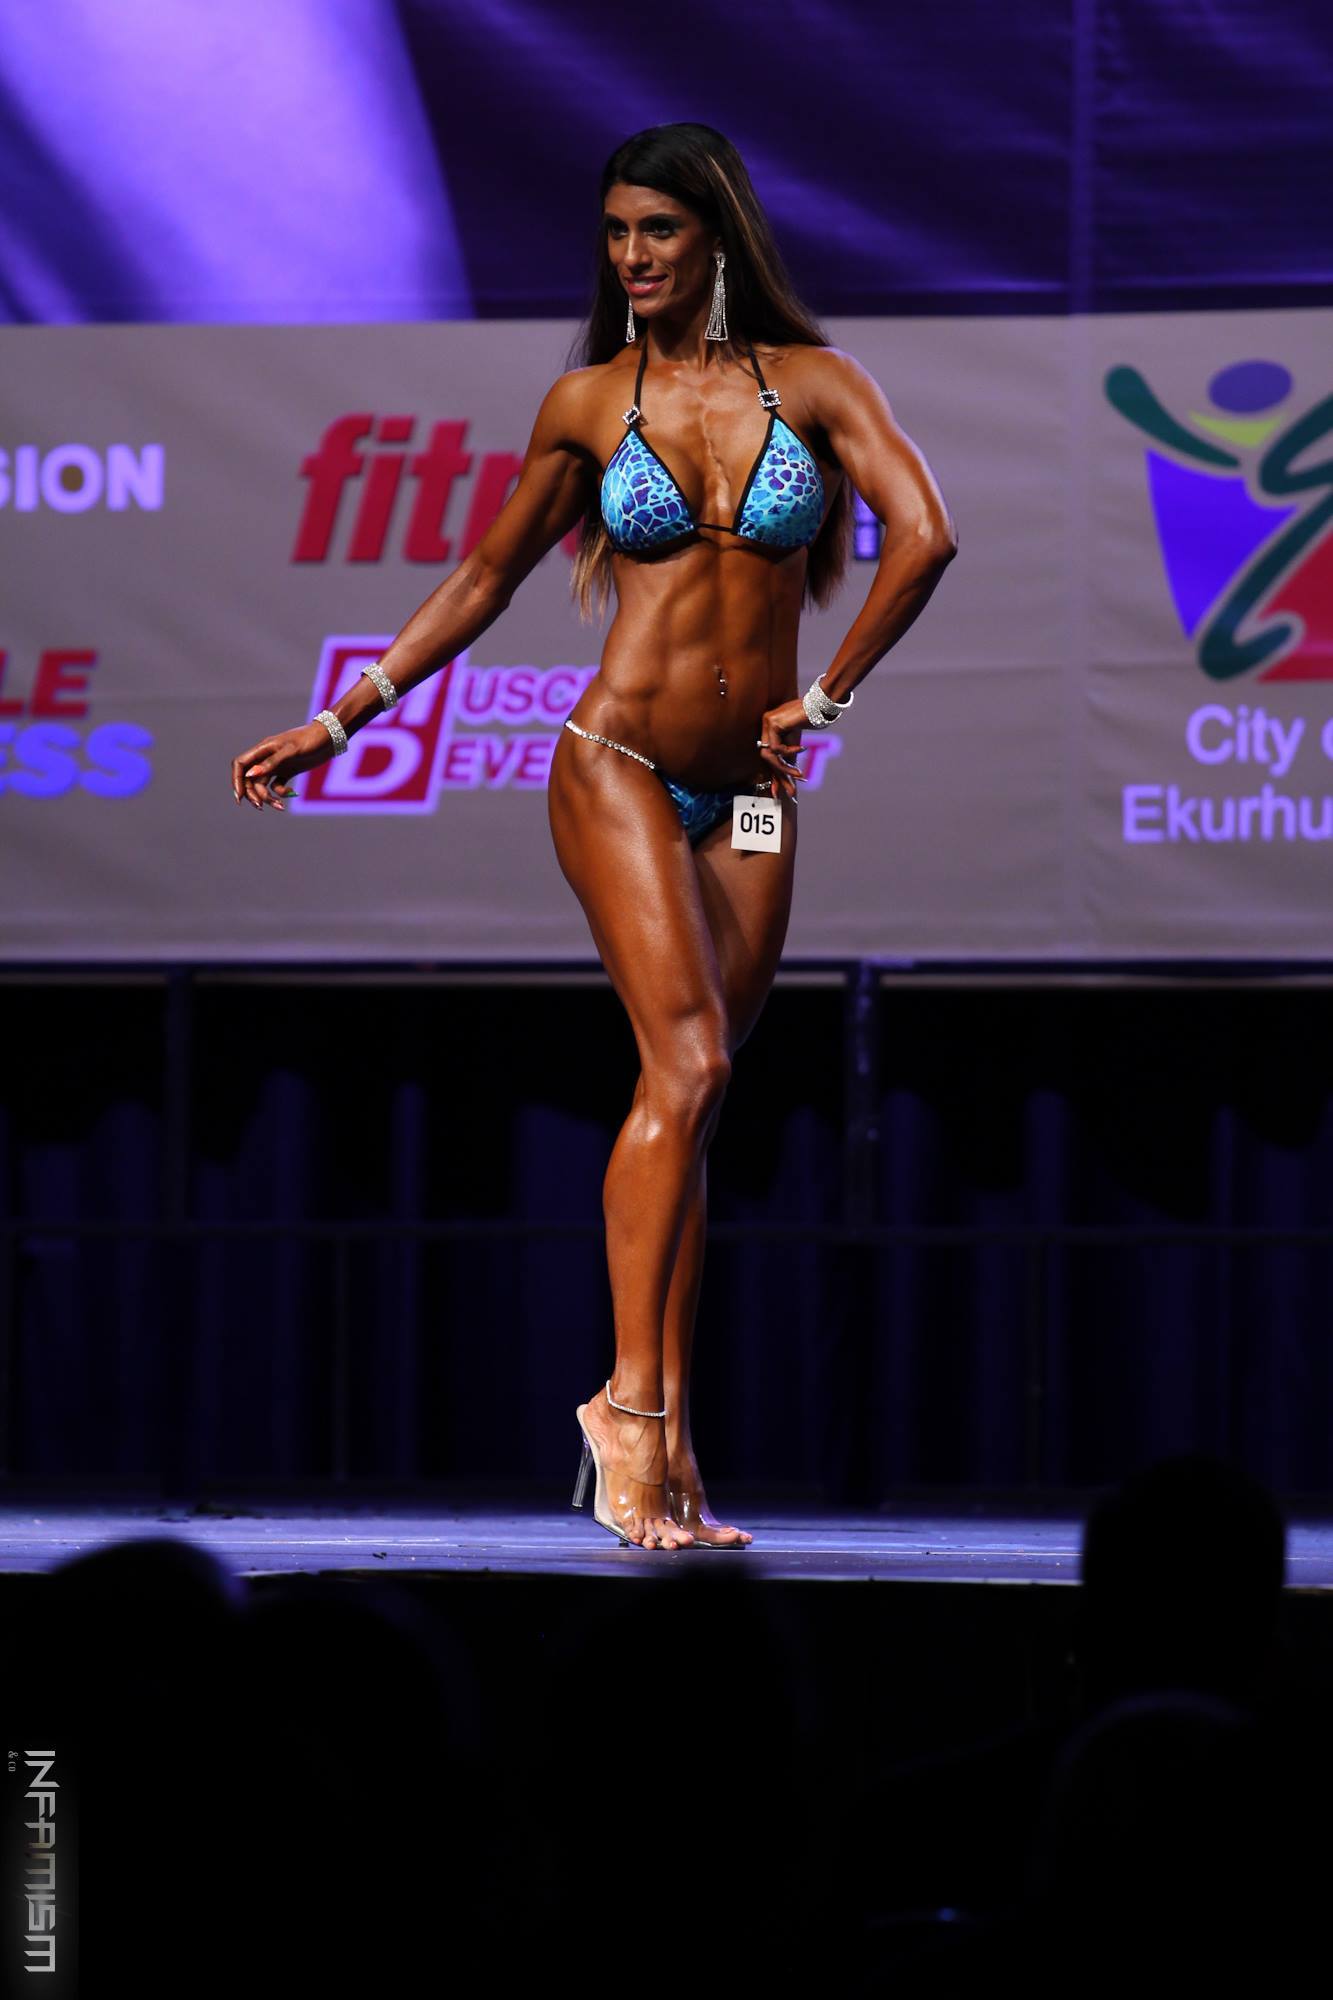 Interview With Medical Student And Fitness Bikini Athlete, Nicolene Booysen